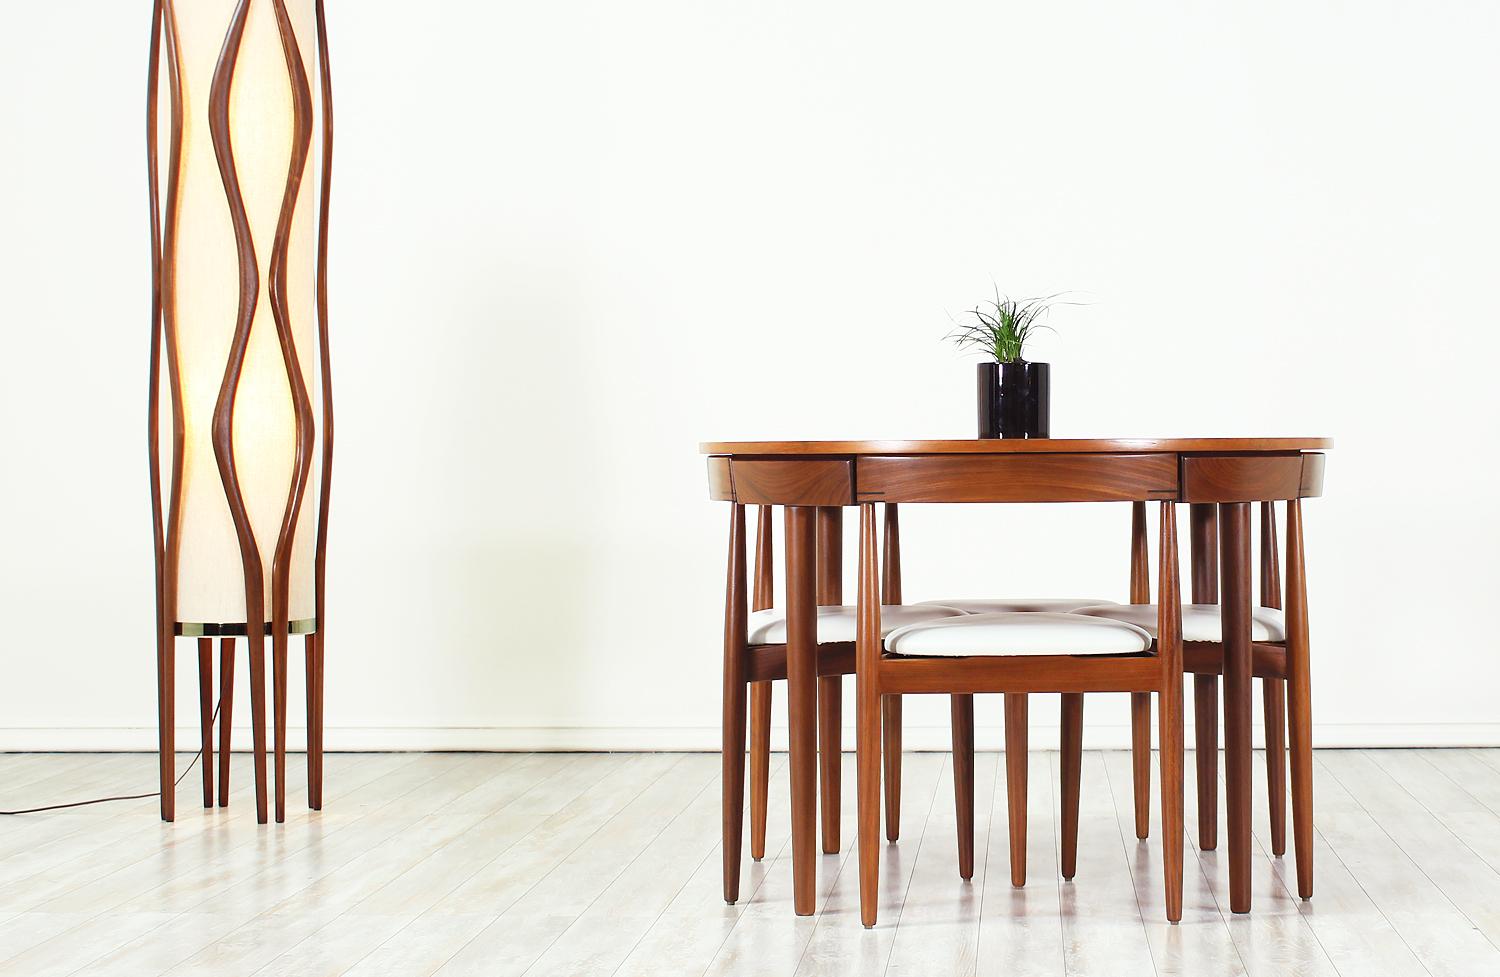 Unique “Roundette” Dining set designed by Hans Olsen for Frem Rølje in Denmark circa 1960s. This striking dining set features a teak wood round table and four dining chairs. The dining chairs seamlessly tuck into the table with their curved back